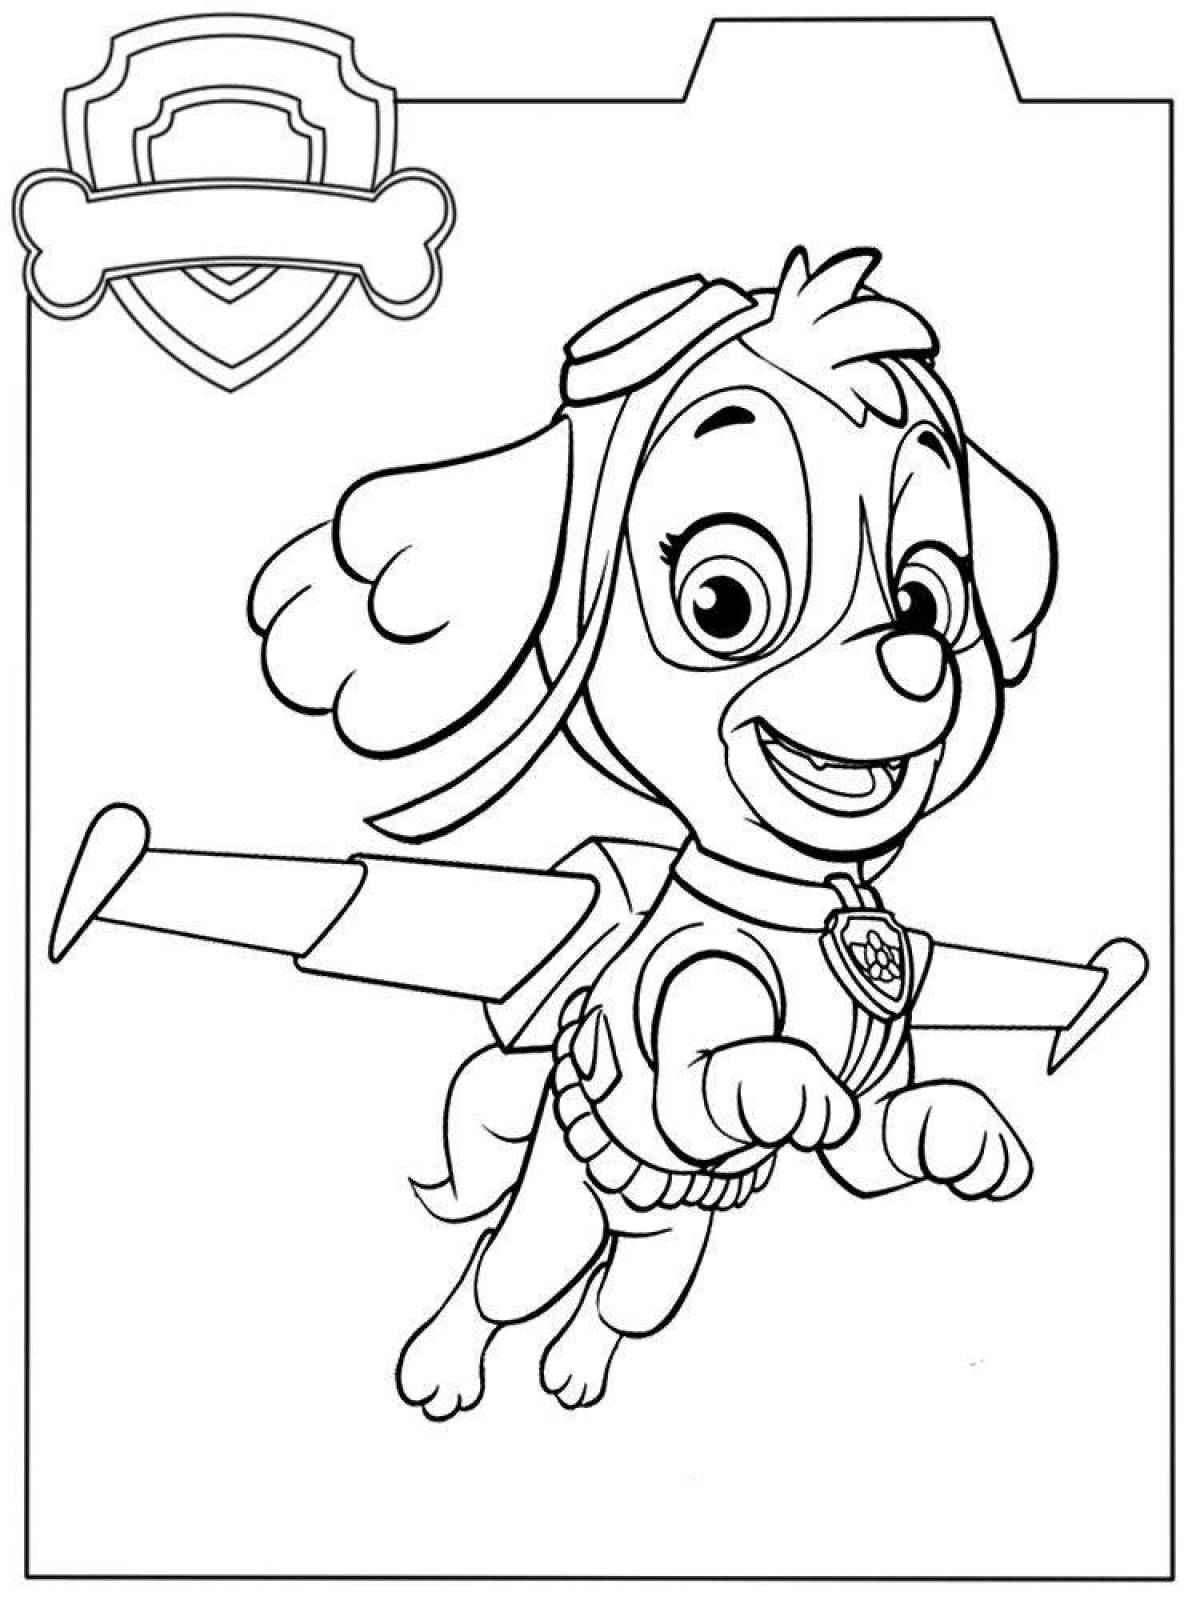 Creative coloring page paw patrol for girls